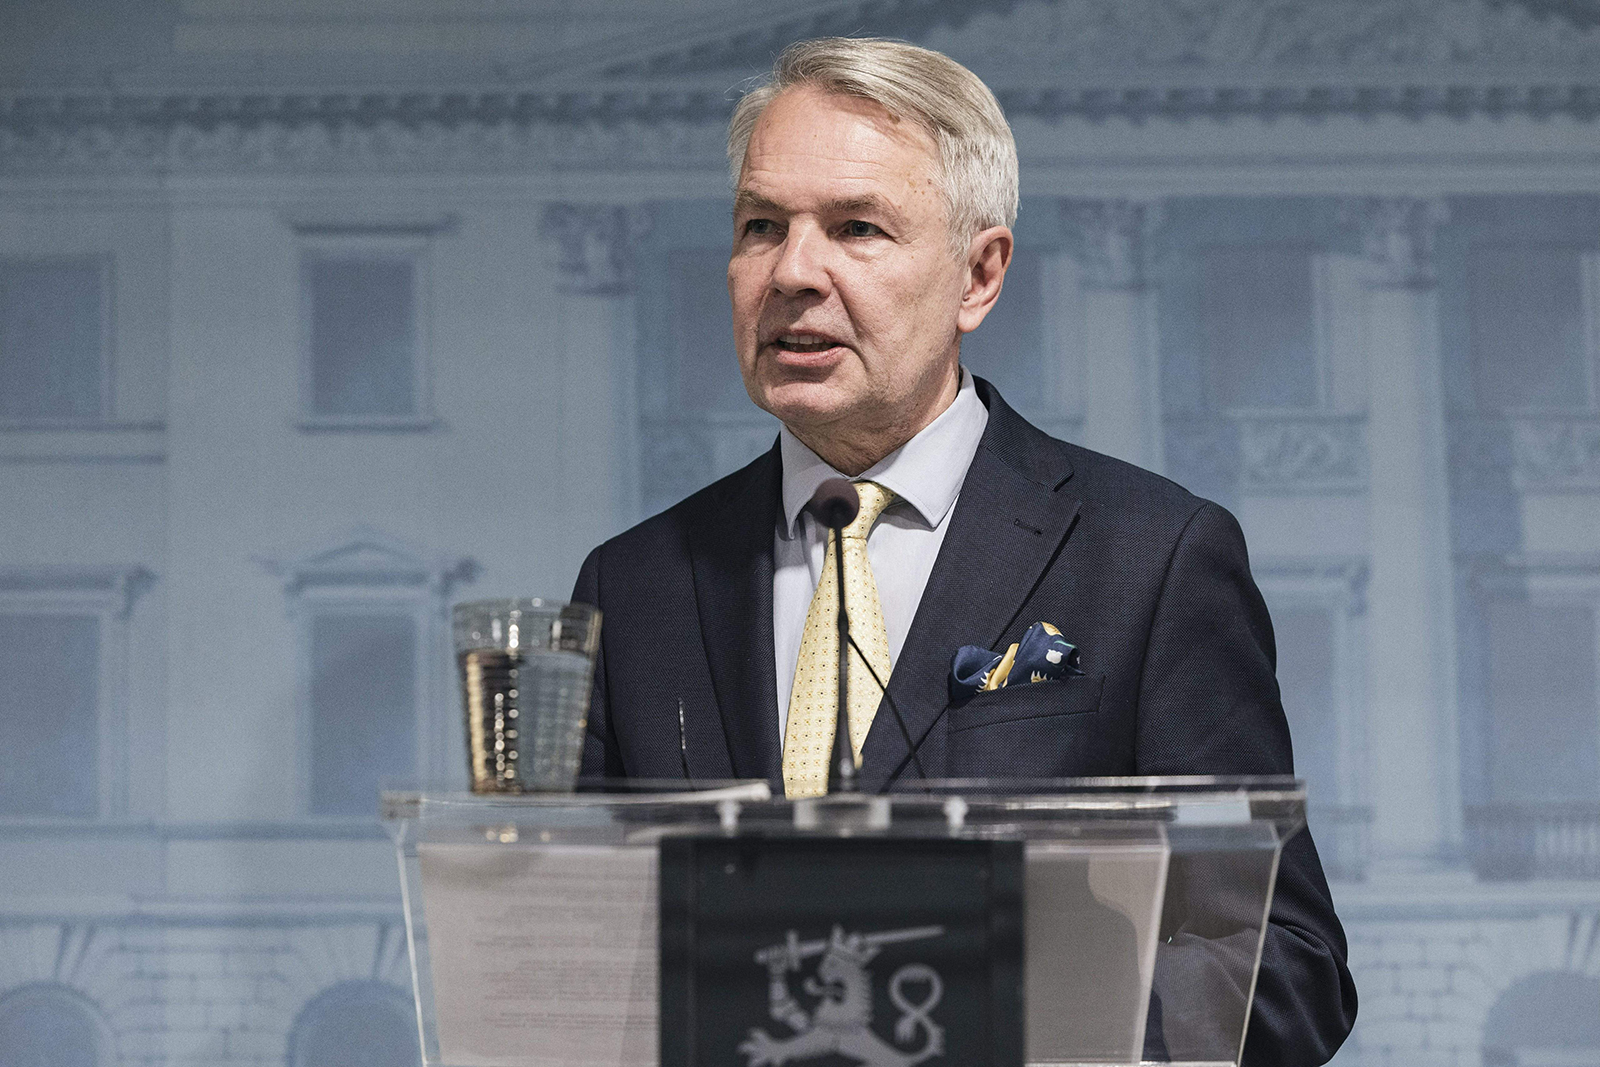 Foreign Minister of Finland Pekka Haavisto speaks during the Finnish Government's press conference in Helsinki on September 29.